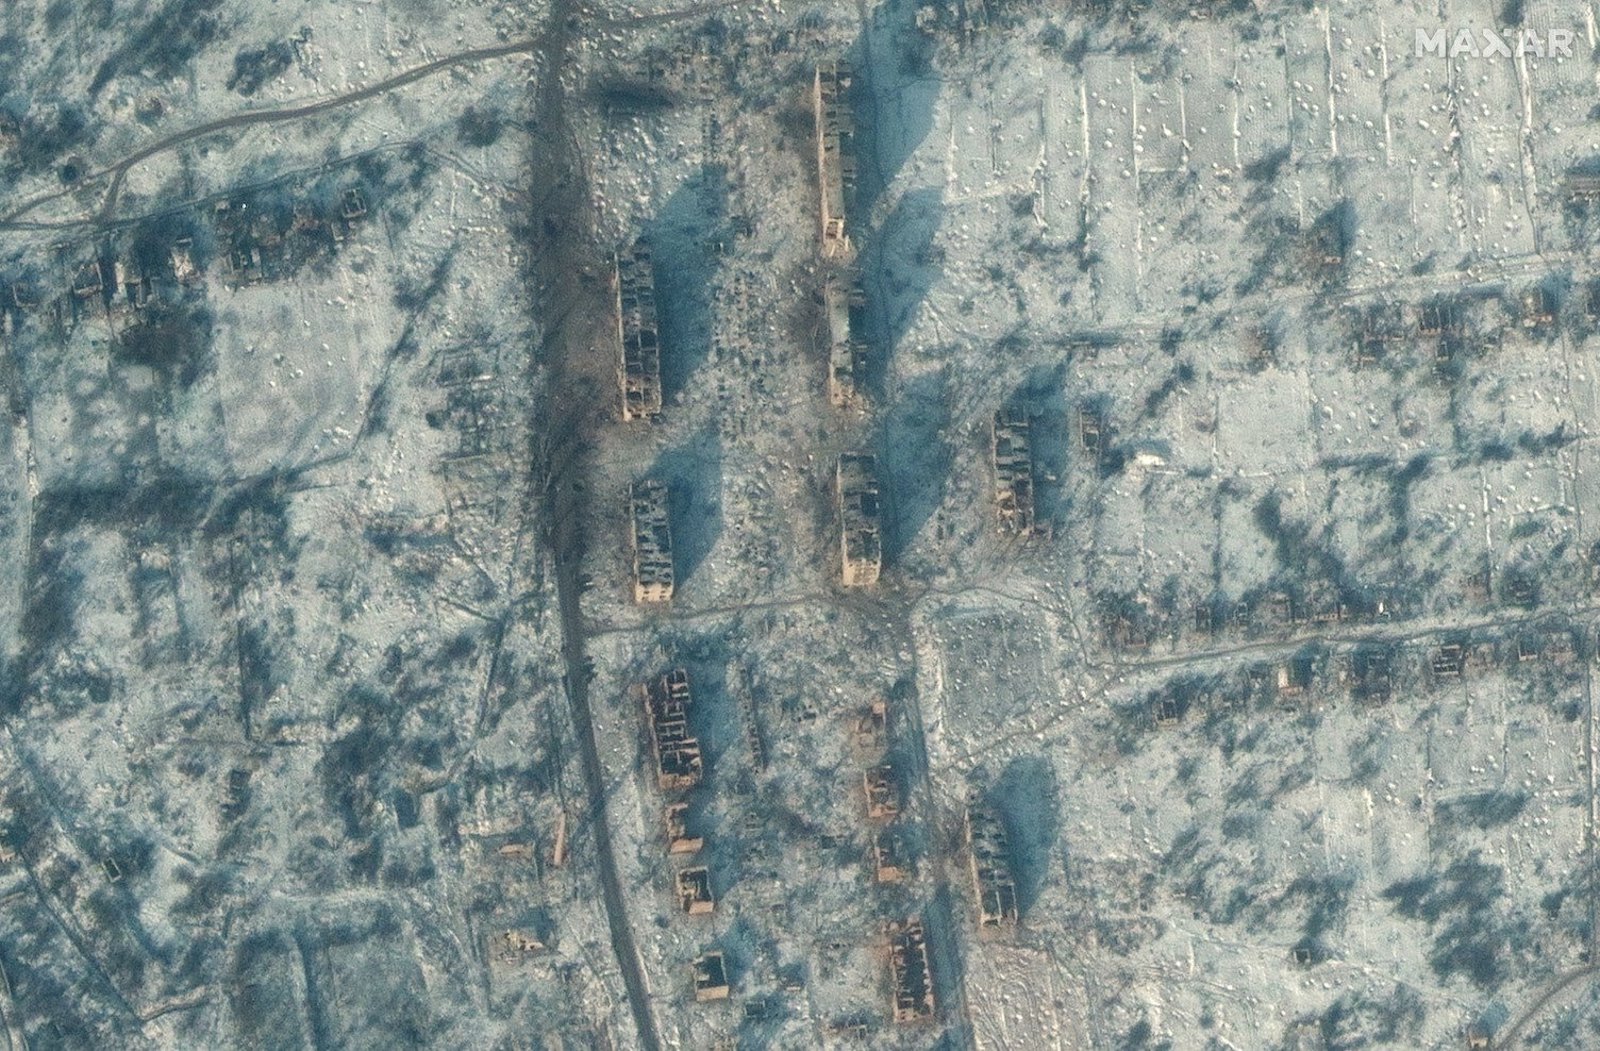 Satellite image shows destroyed apartment buildings and homes in Soledar on January 3, 2022.